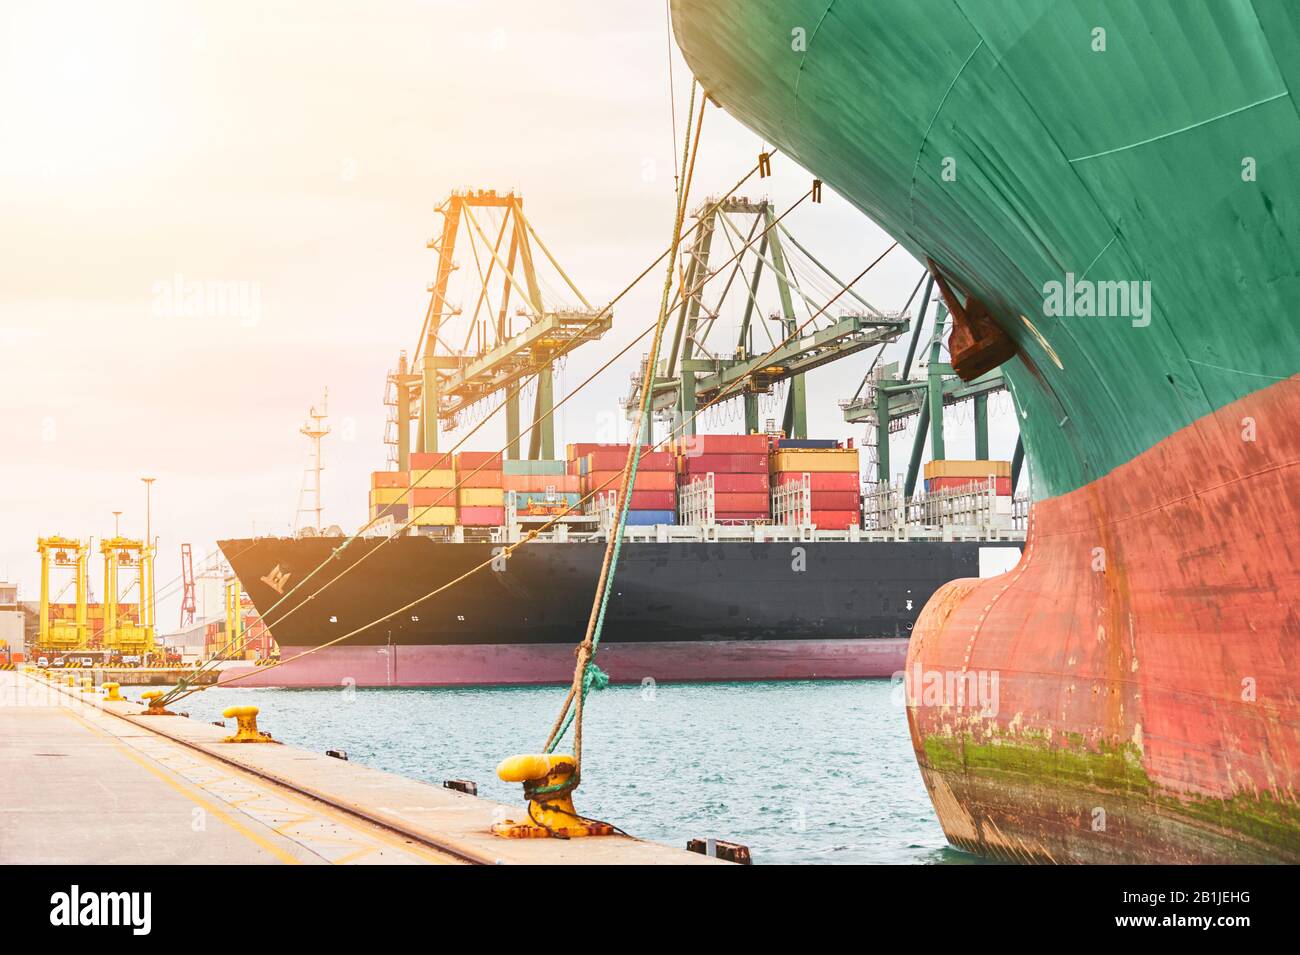 Harbor enviroment: Ship-to-shore cranes unloading containers from a ship. Transportation industry and shipment logistics. Export and import bussines. Stock Photo